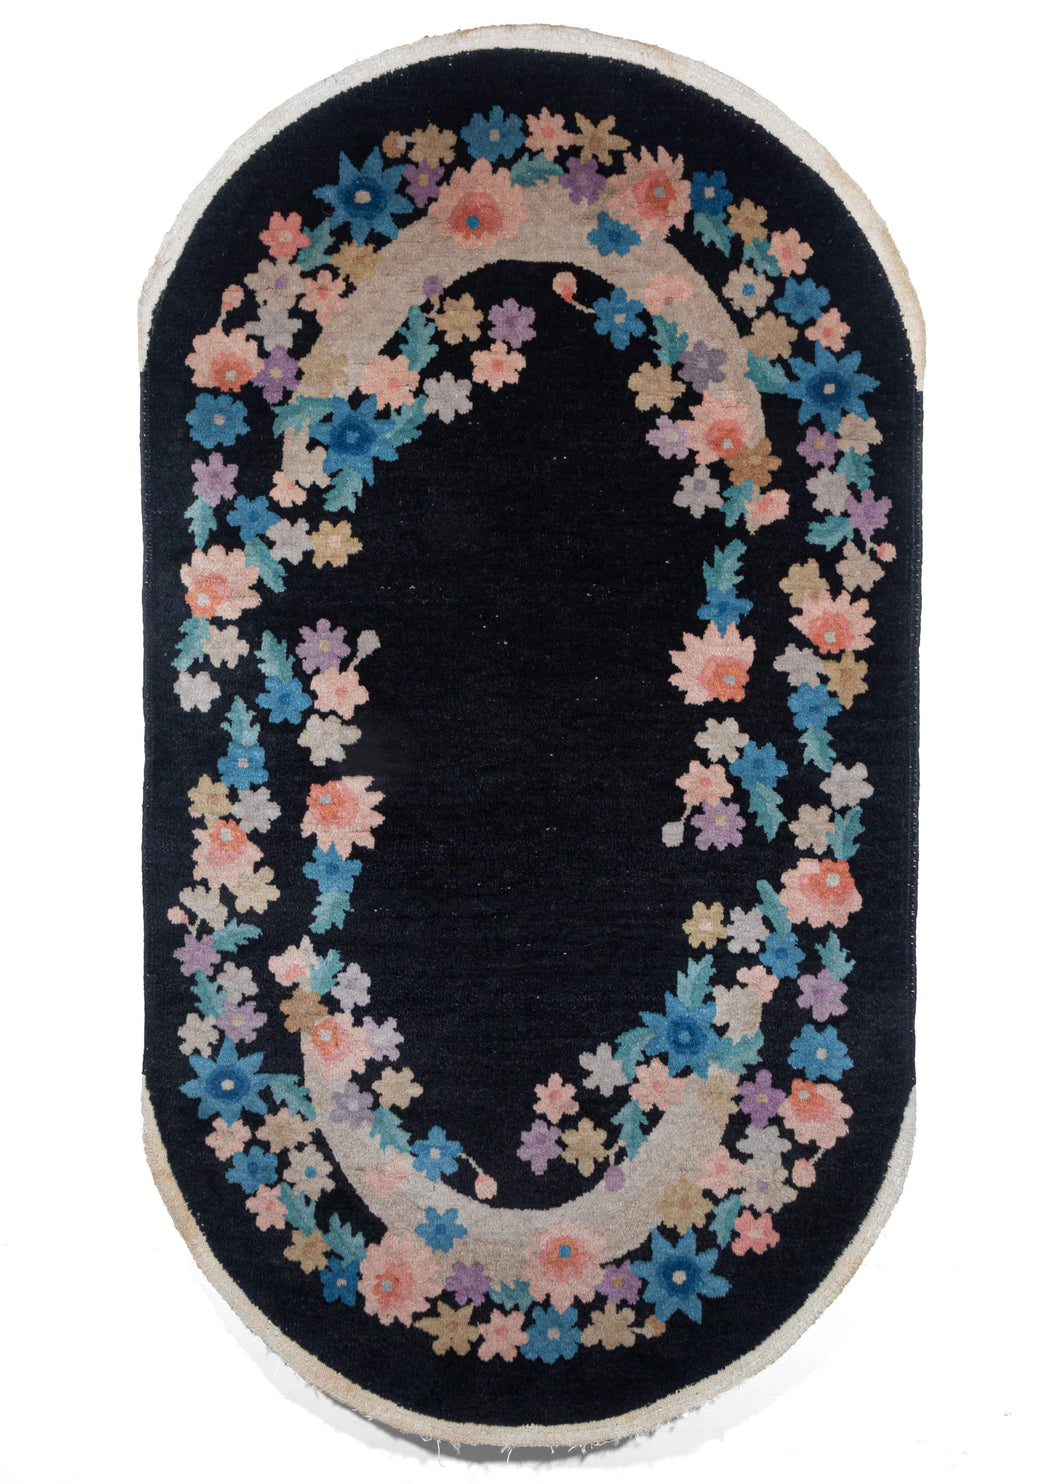 Vintage Black Oval Chinese Art Deco Rug with a open border of pastel flowers